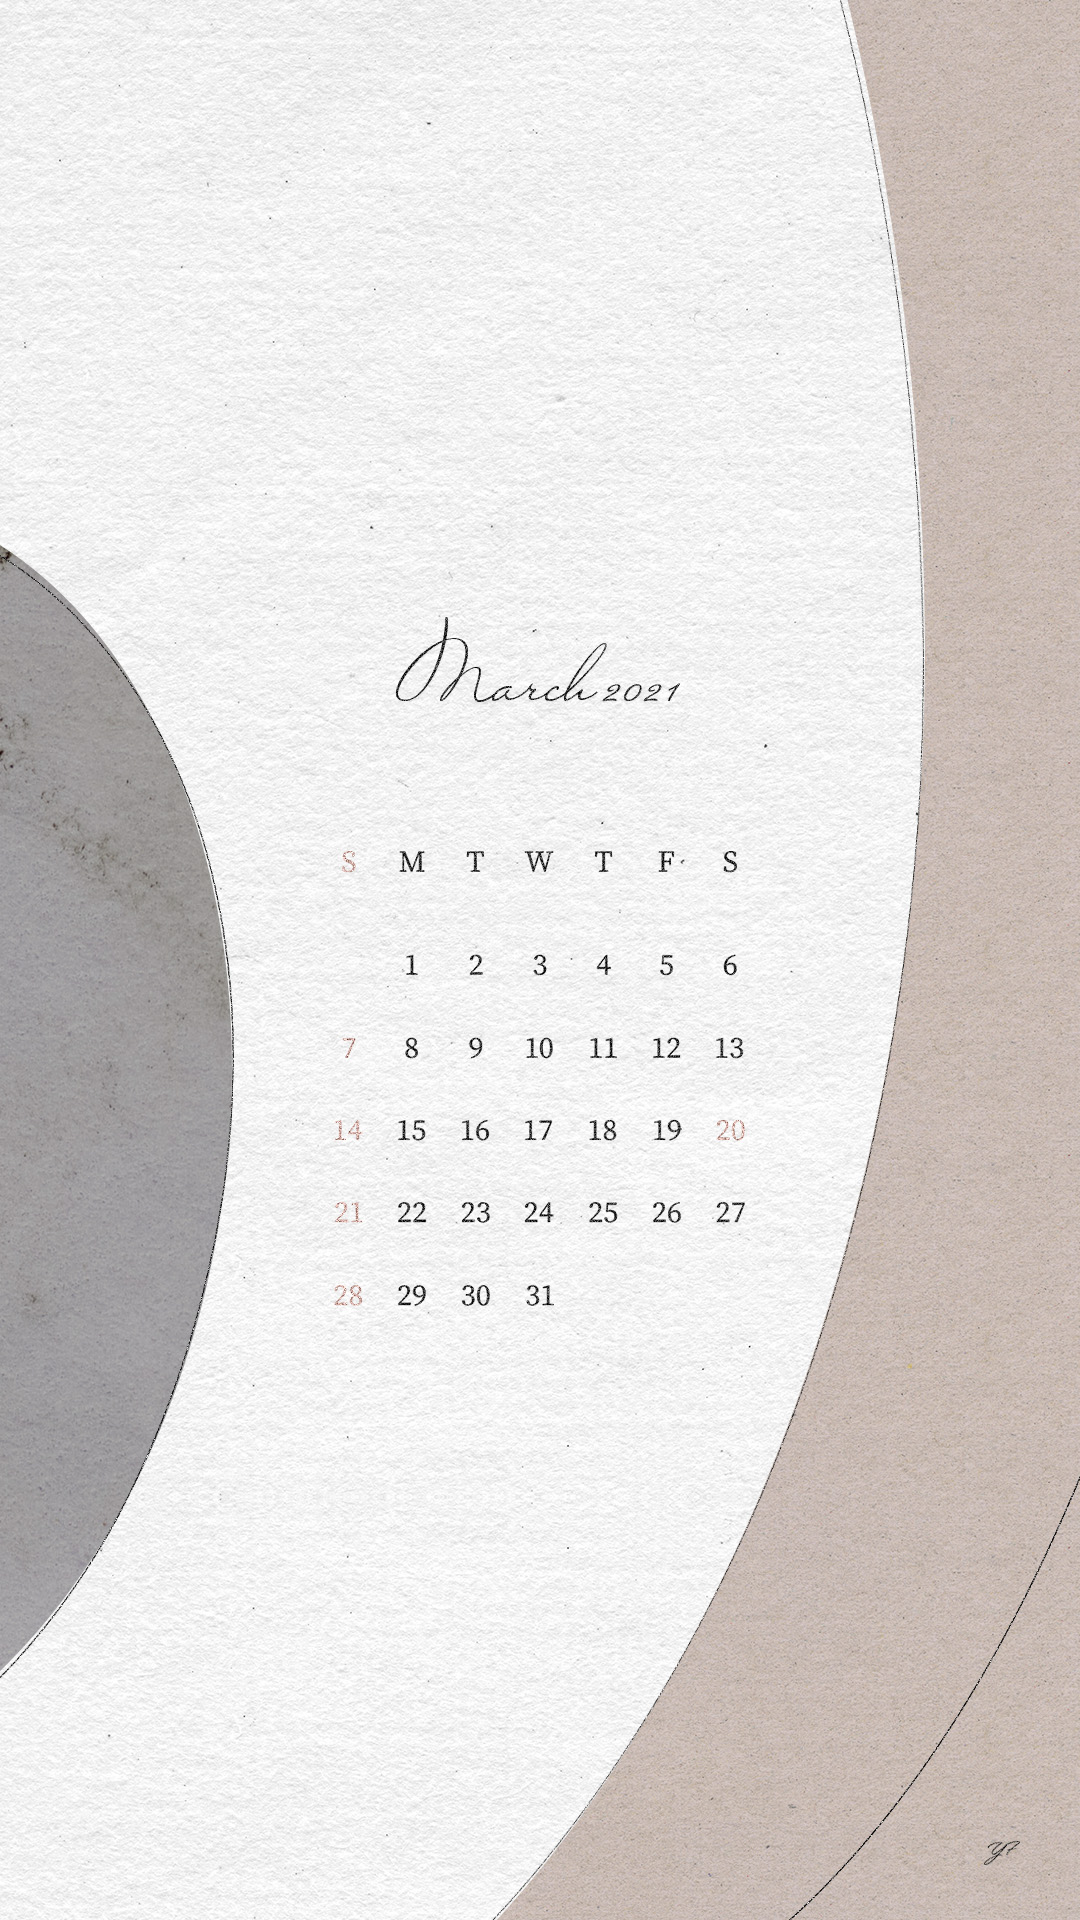 March 21 Calendar Wallpaper For The Iphone Gray Pink Ver Designed By Yf